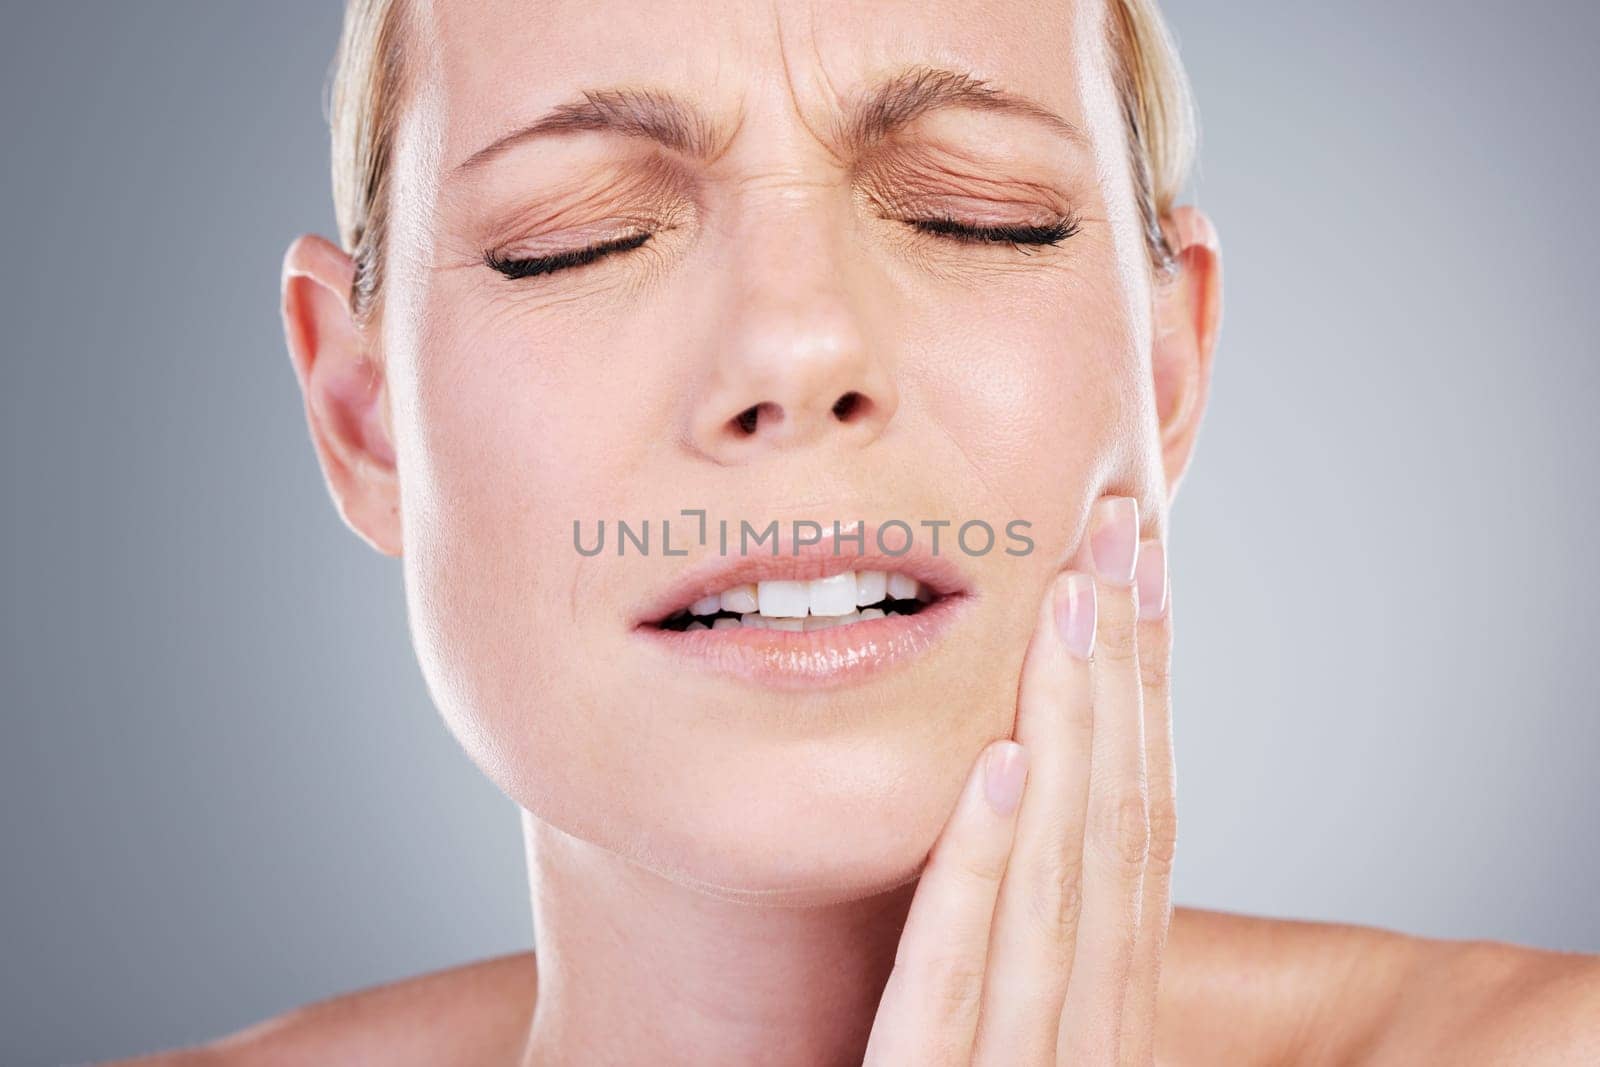 A visit to the dentist is much needed. Studio shot of an attractive mature woman experiencing toothache against a grey background